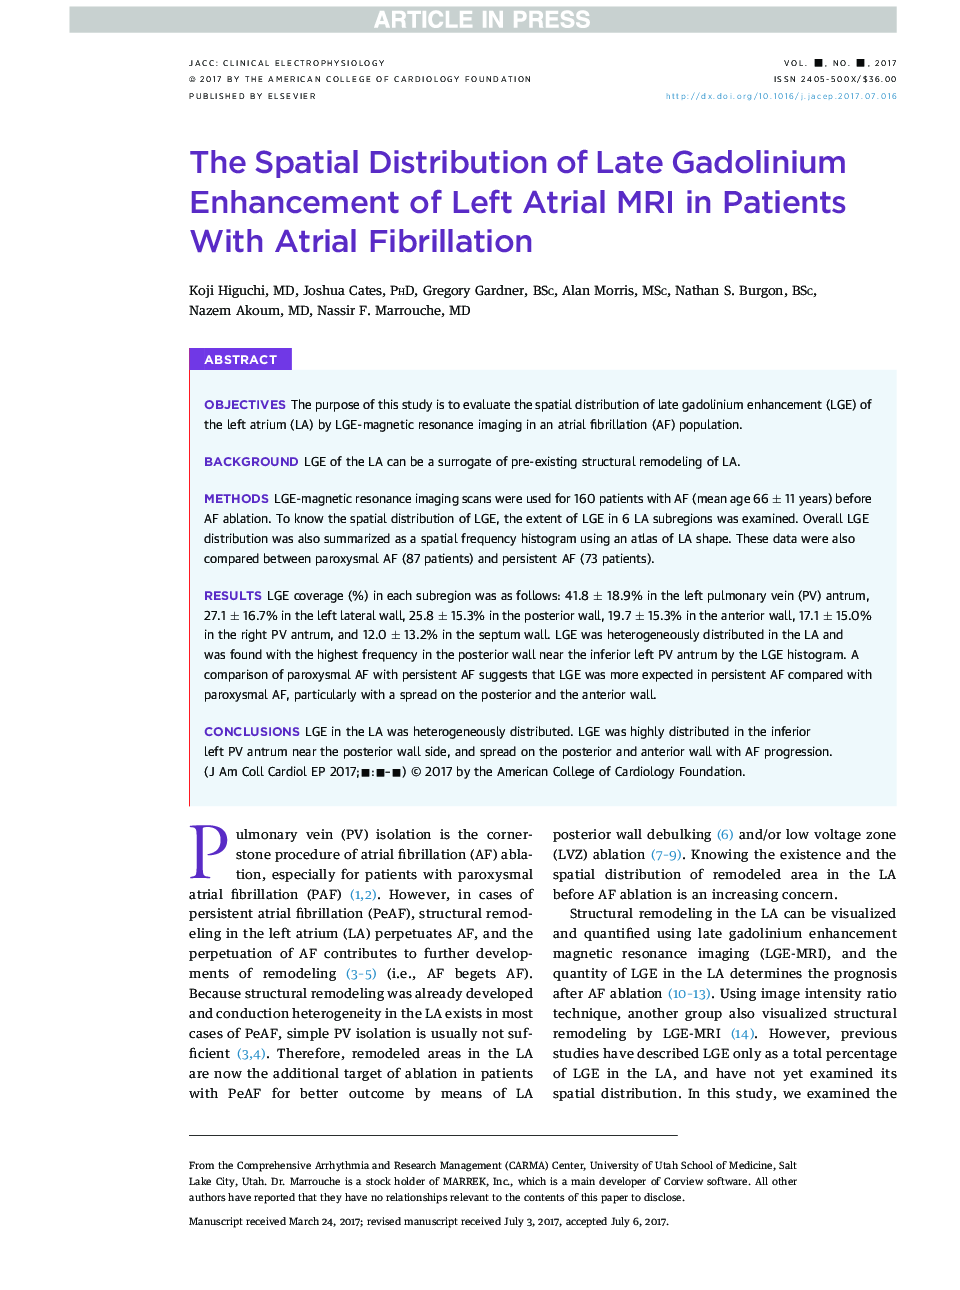 The Spatial Distribution of Late Gadolinium Enhancement of LeftÂ Atrial Magnetic Resonance Imaging inÂ Patients With Atrial Fibrillation